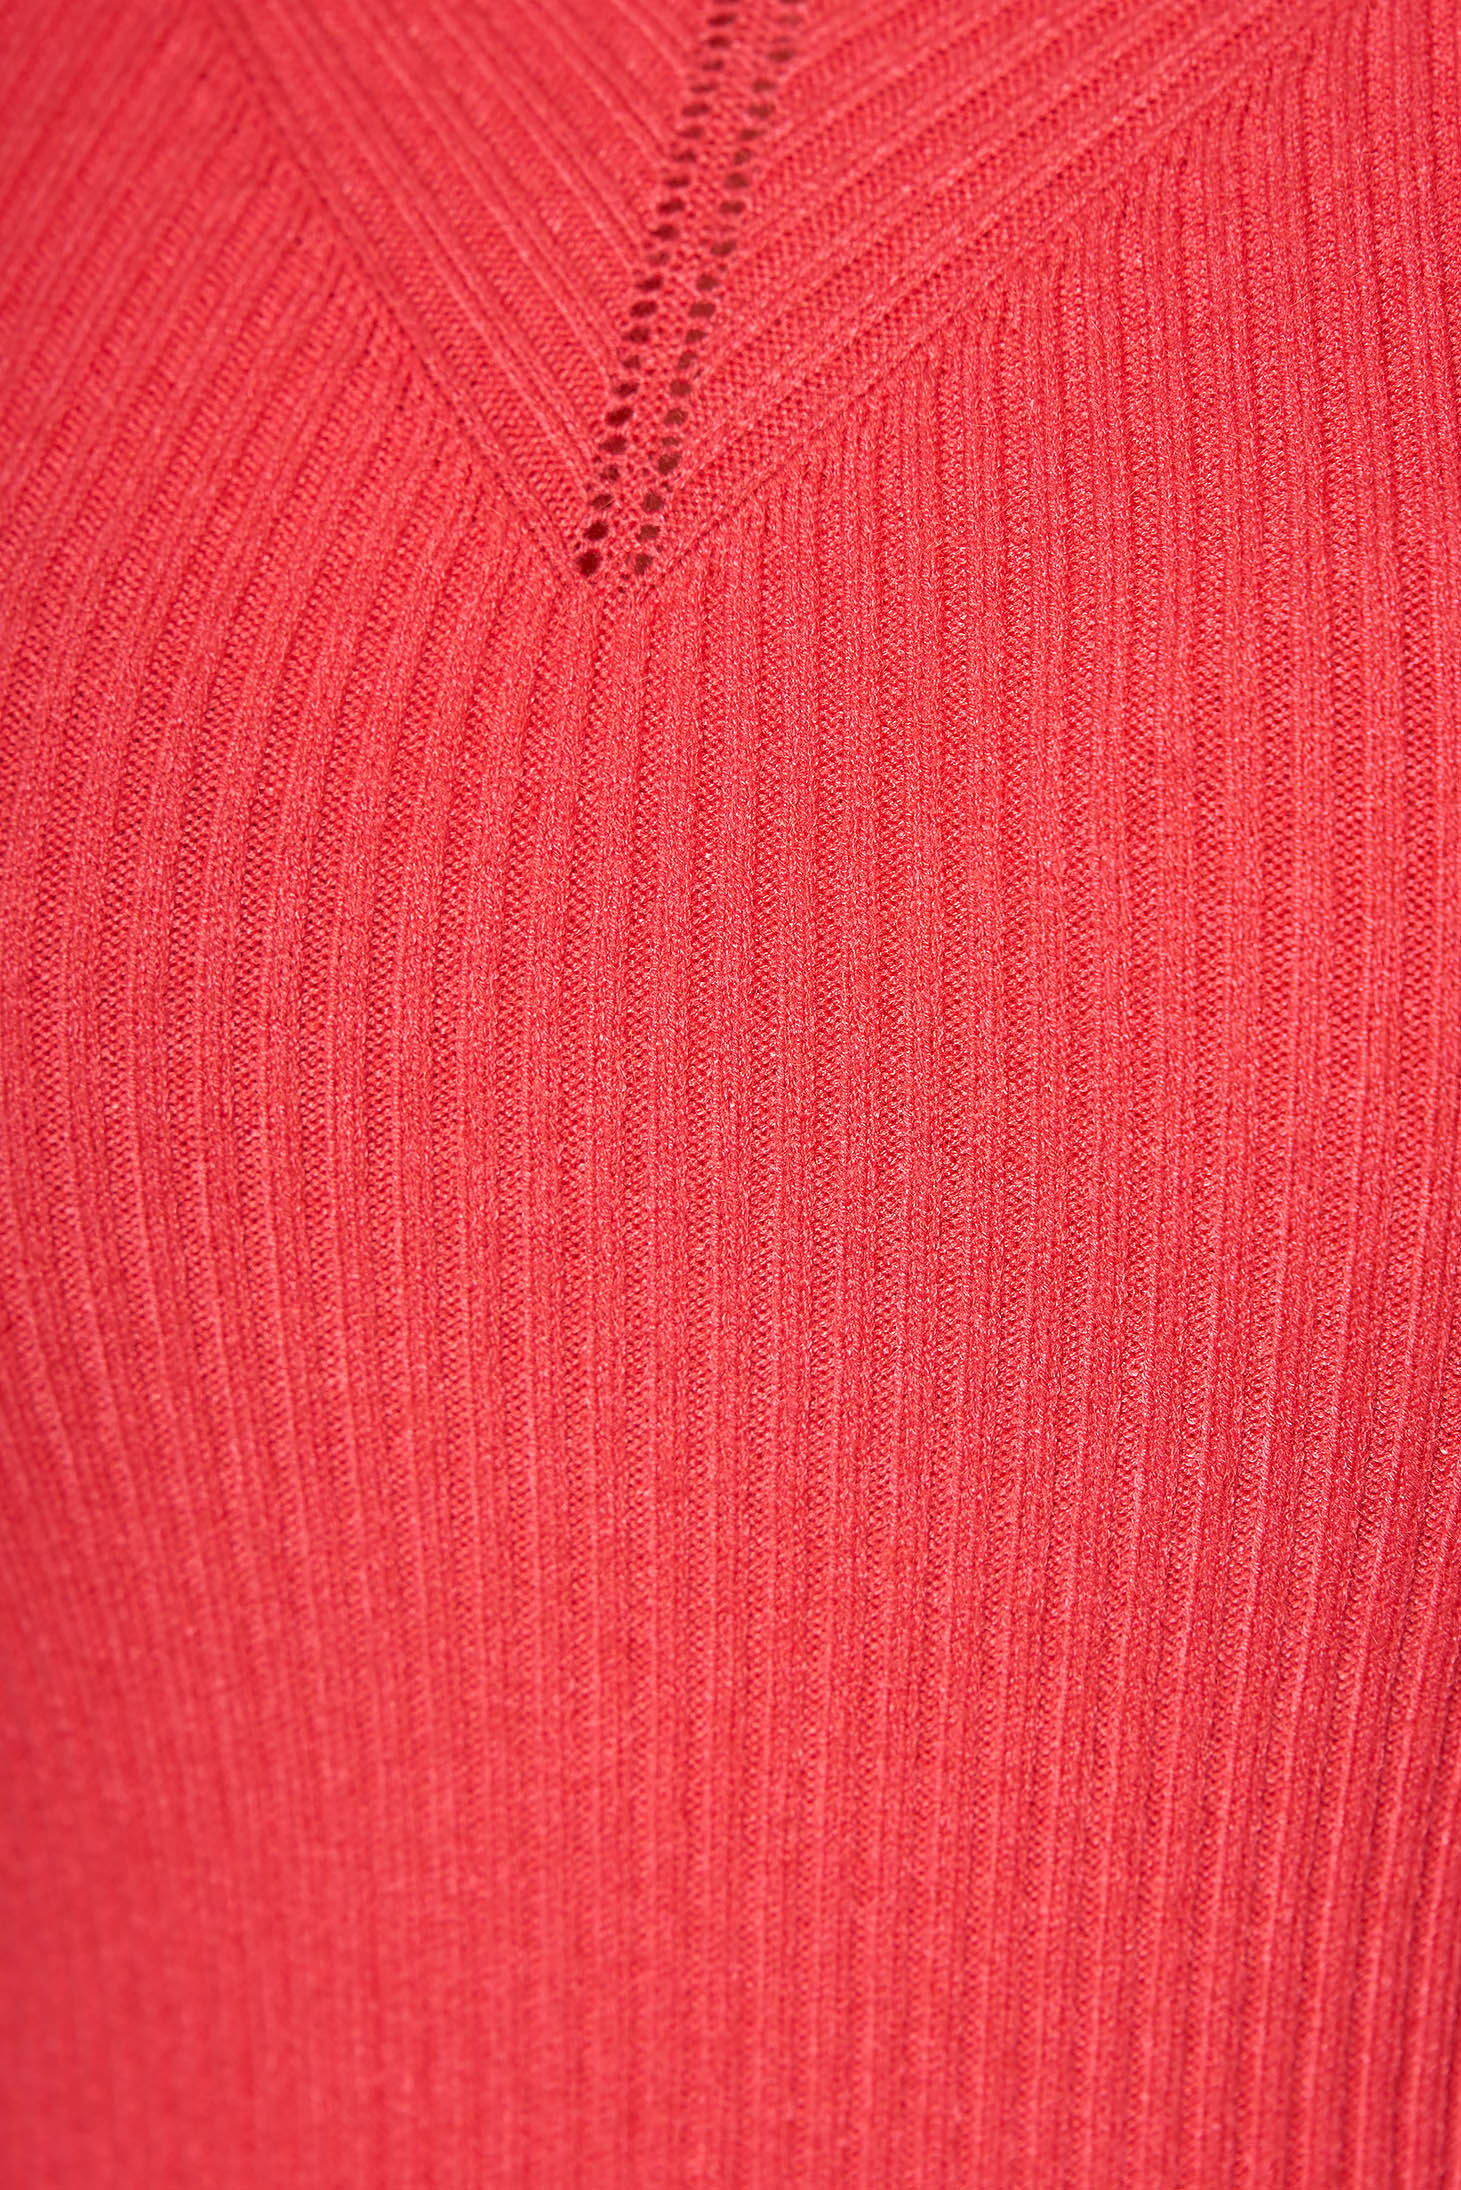 Coral sweater casual short cut tented with v-neckline long sleeved knitted 4 - StarShinerS.com